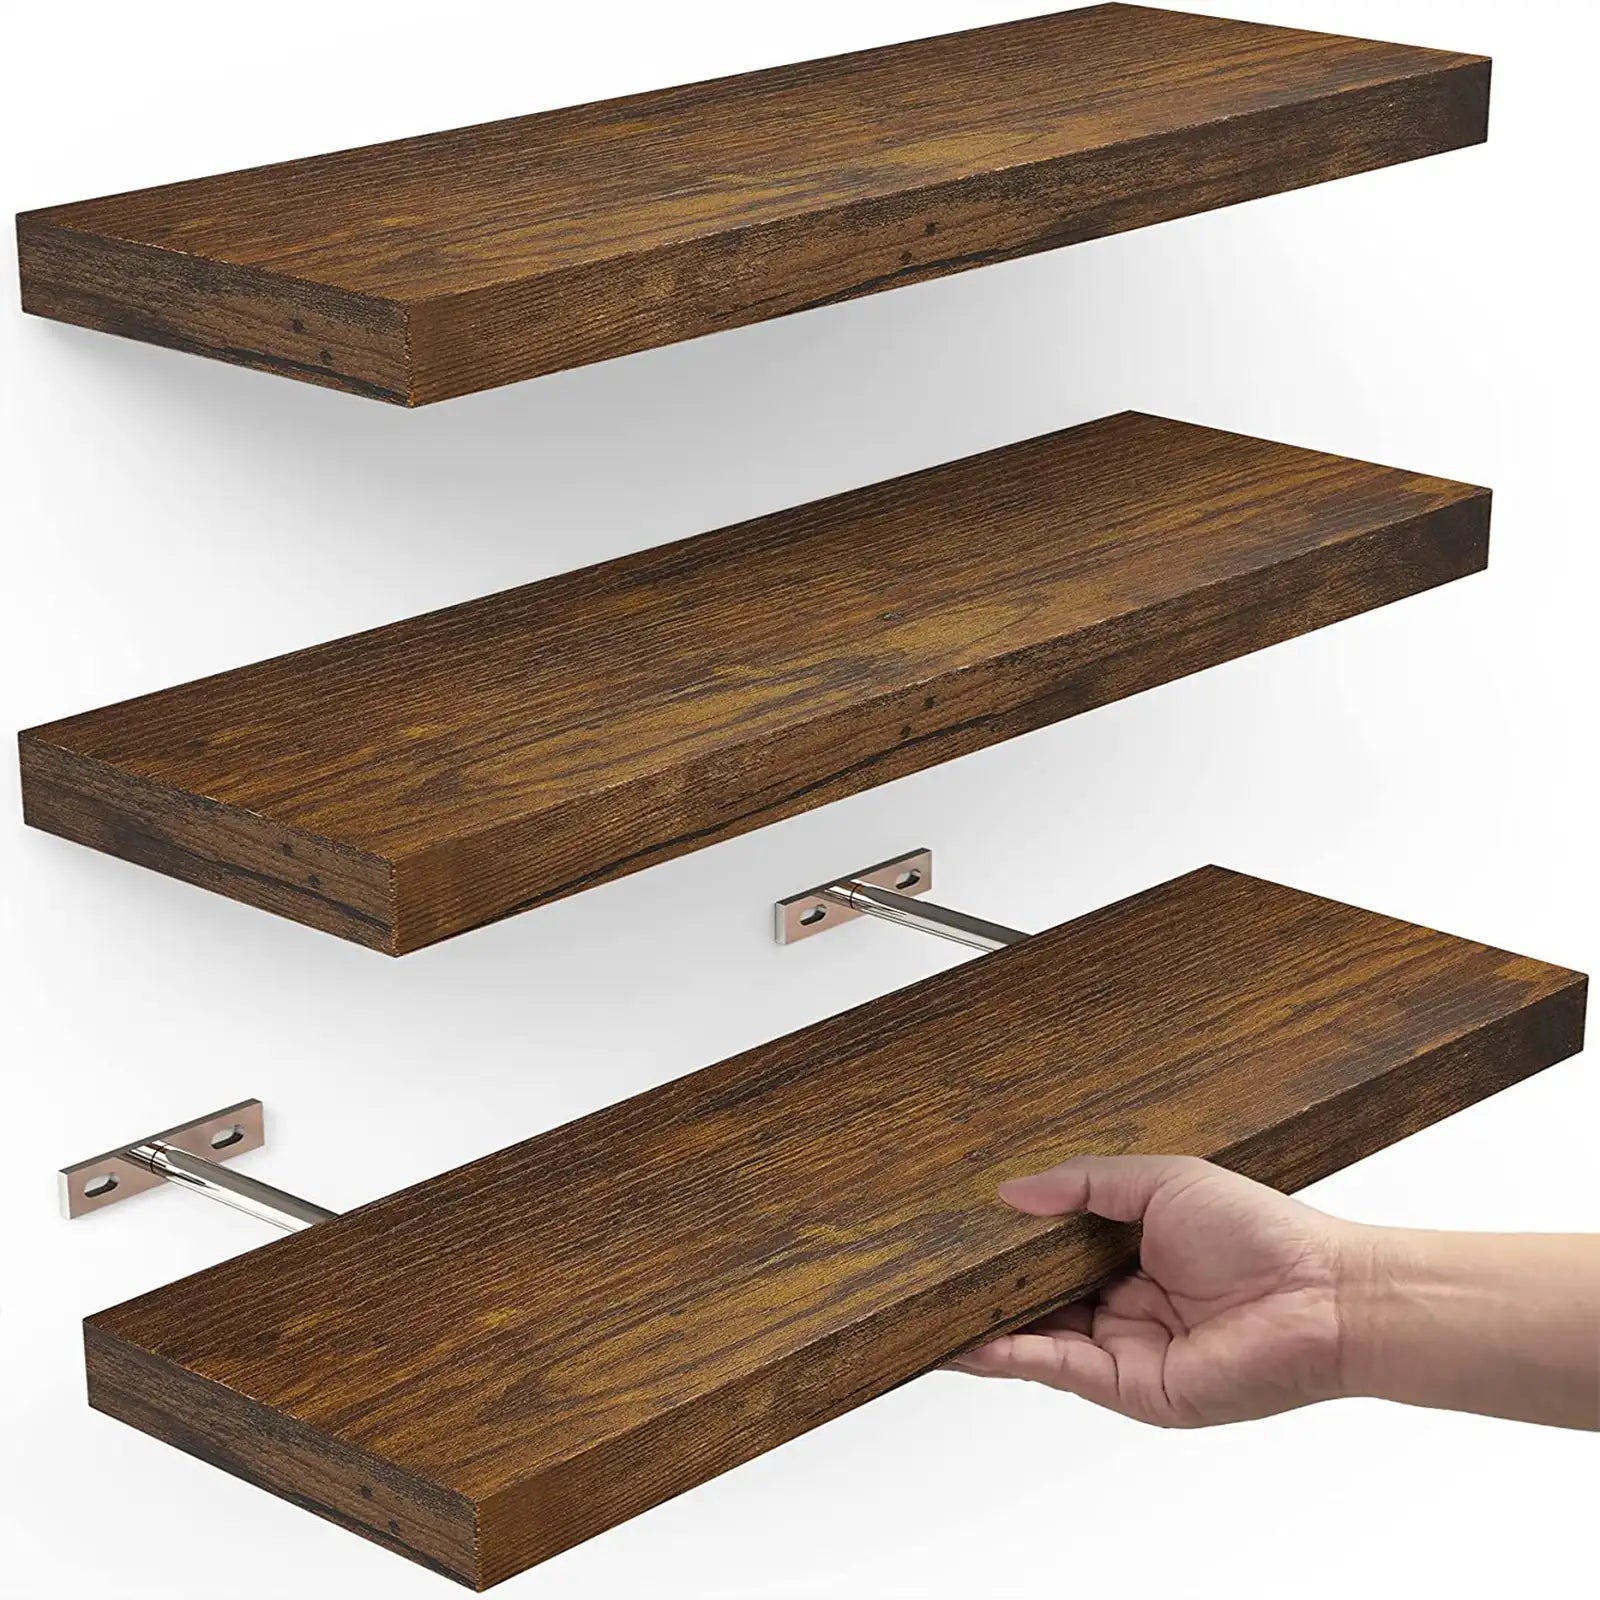 Floating Shelves, Wall Mounted Rustic Wood Shelves for Bathroom, Bedroom, Living Room, Kitchen, Small Hanging Shelf for Books/Storage/Room Decor with 22lbs Capacity (Set of 3, 16in)